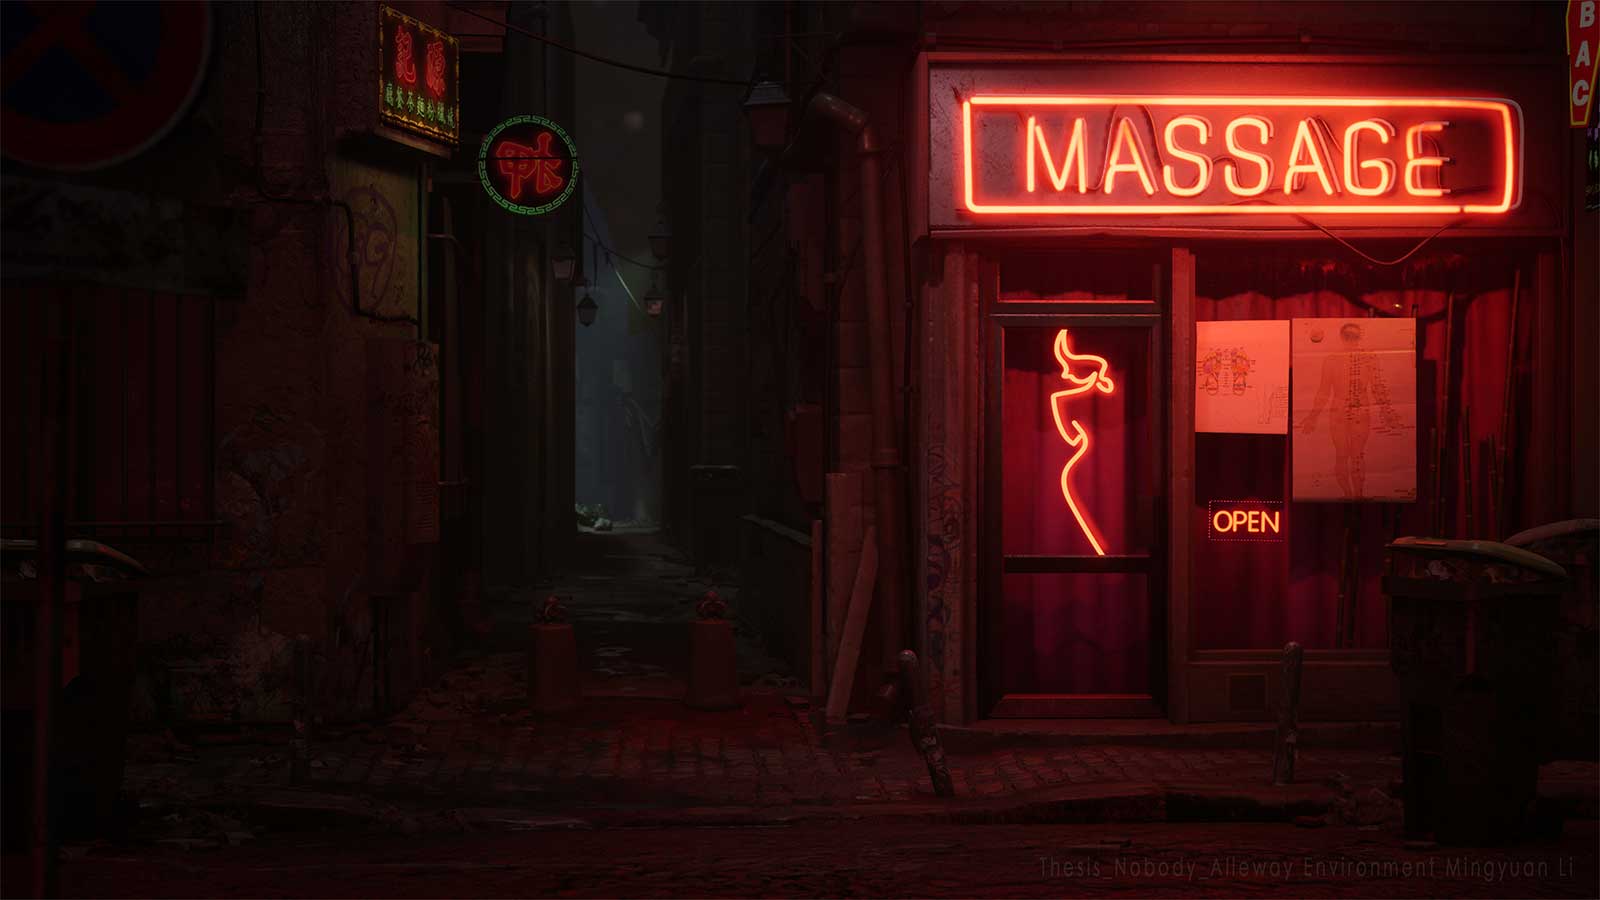 A dark alleyway entrance with a shop that has a neon sign advertising a massage.